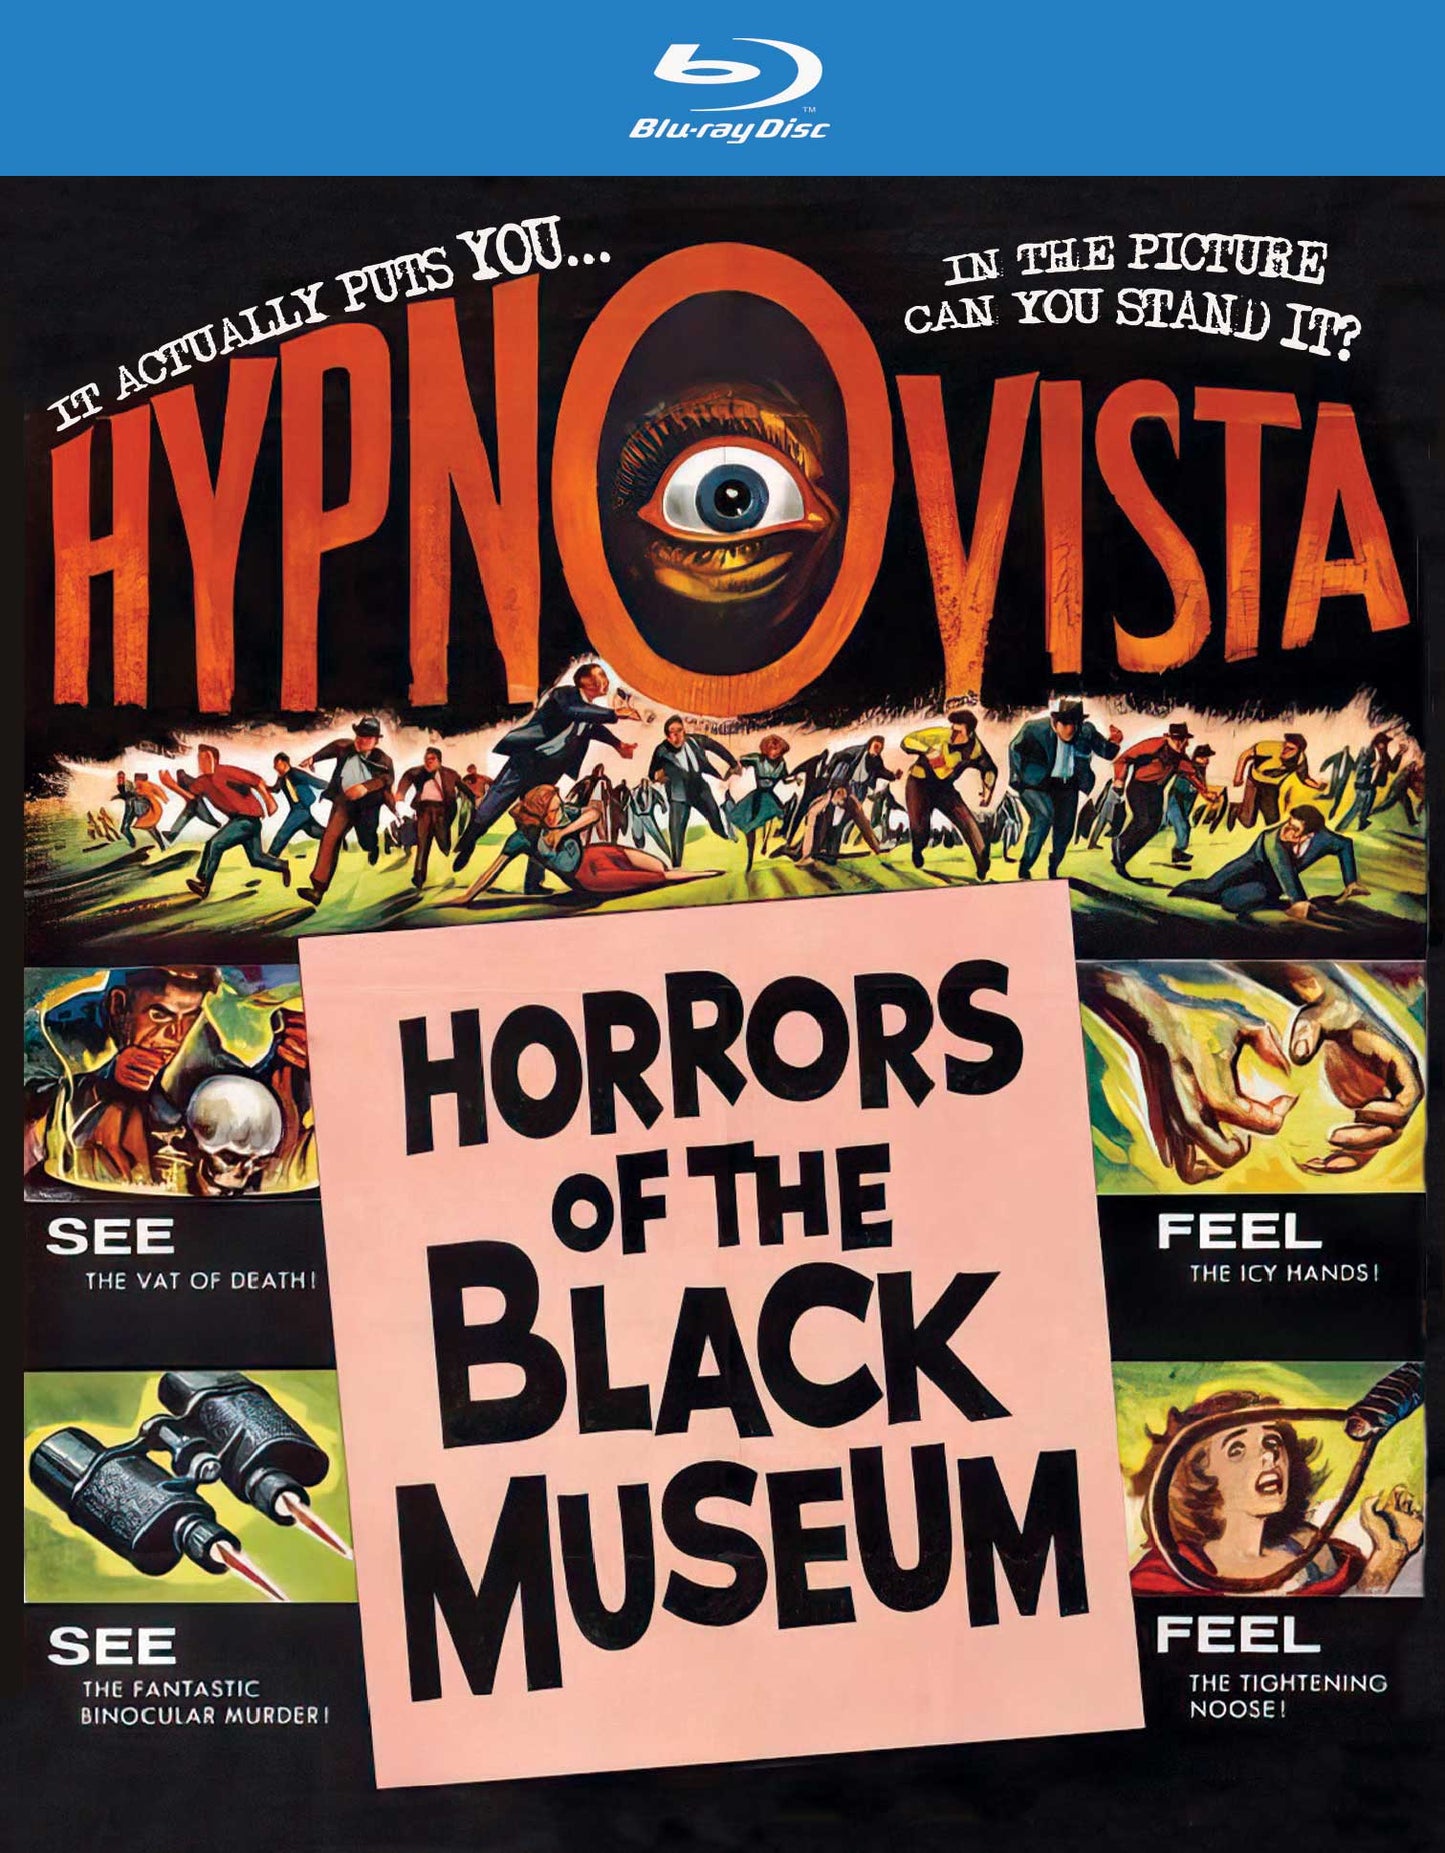 Horrors Of The Black Museum - Restored Uncut Special Edition Blu-ray (VCI Entertainment/U.S.)